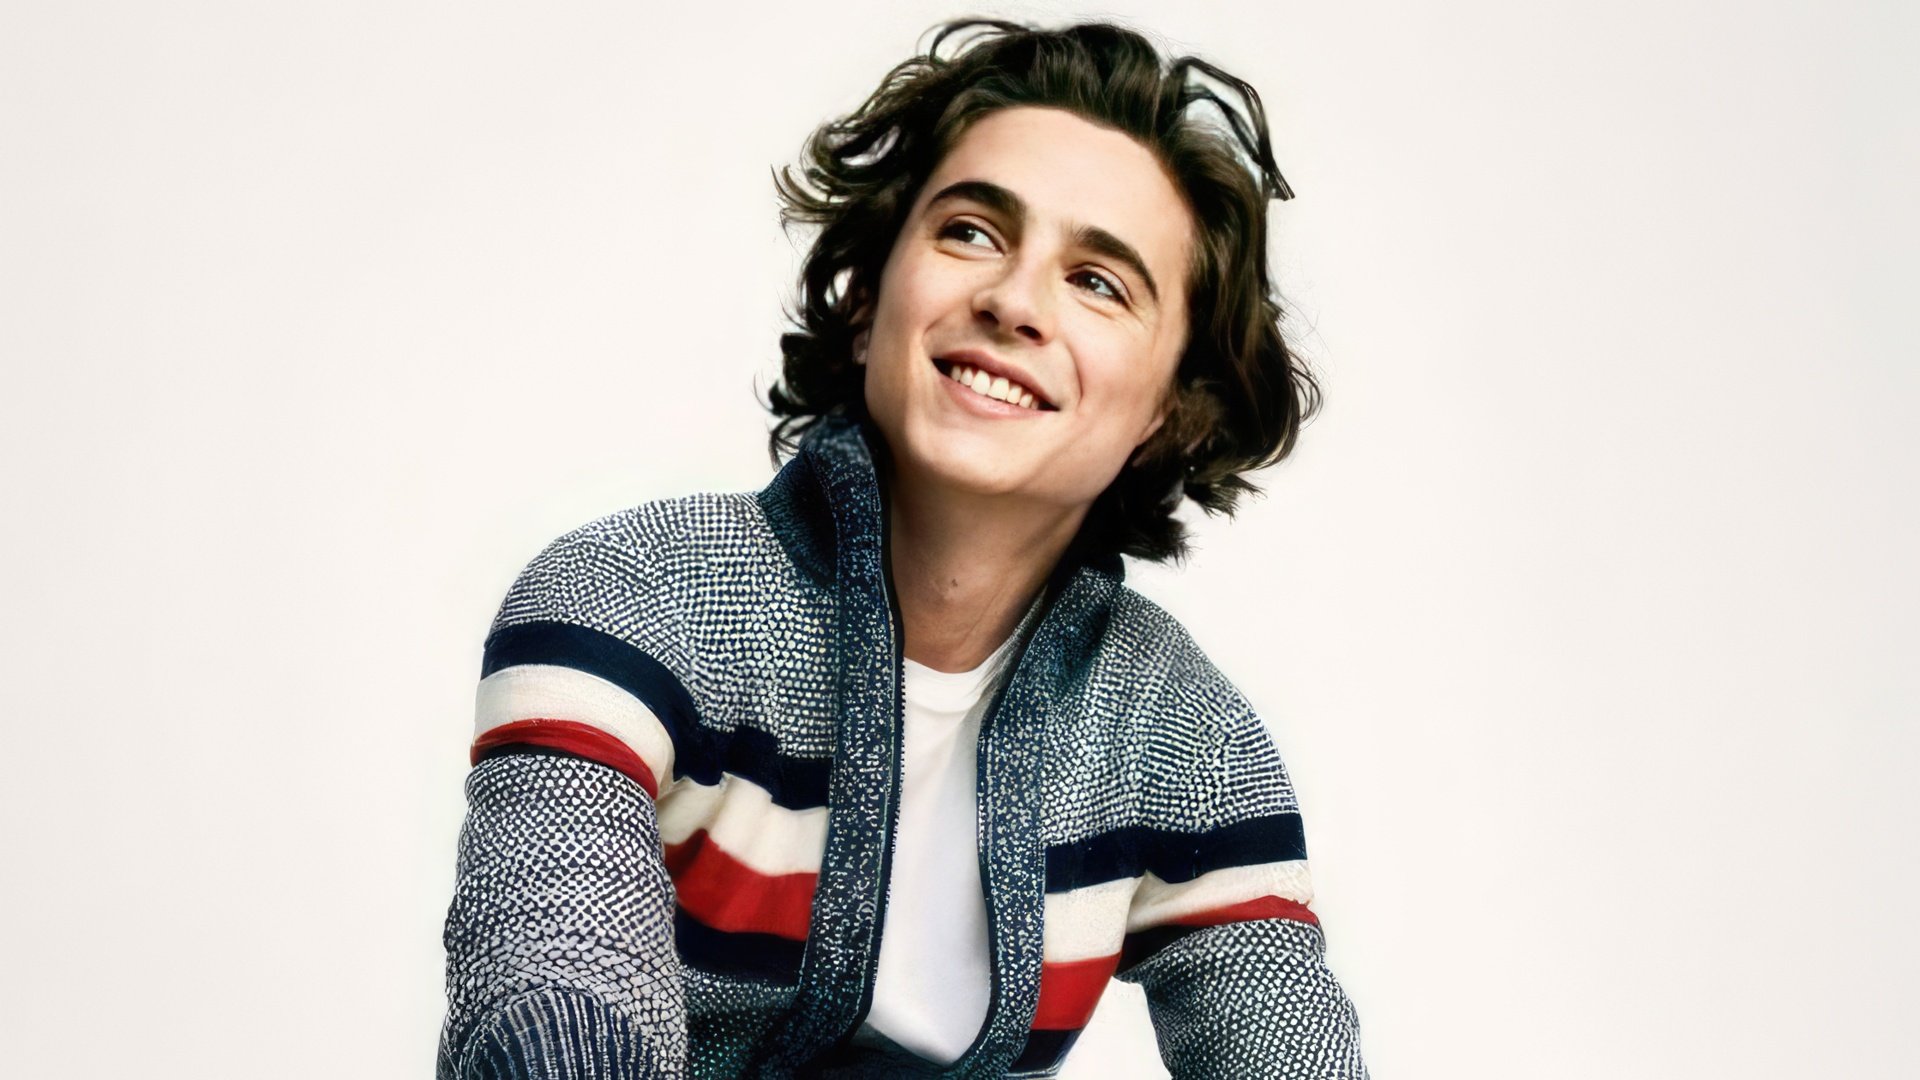 Actor Timothée Chalamet, the star of Call Me by Your Name